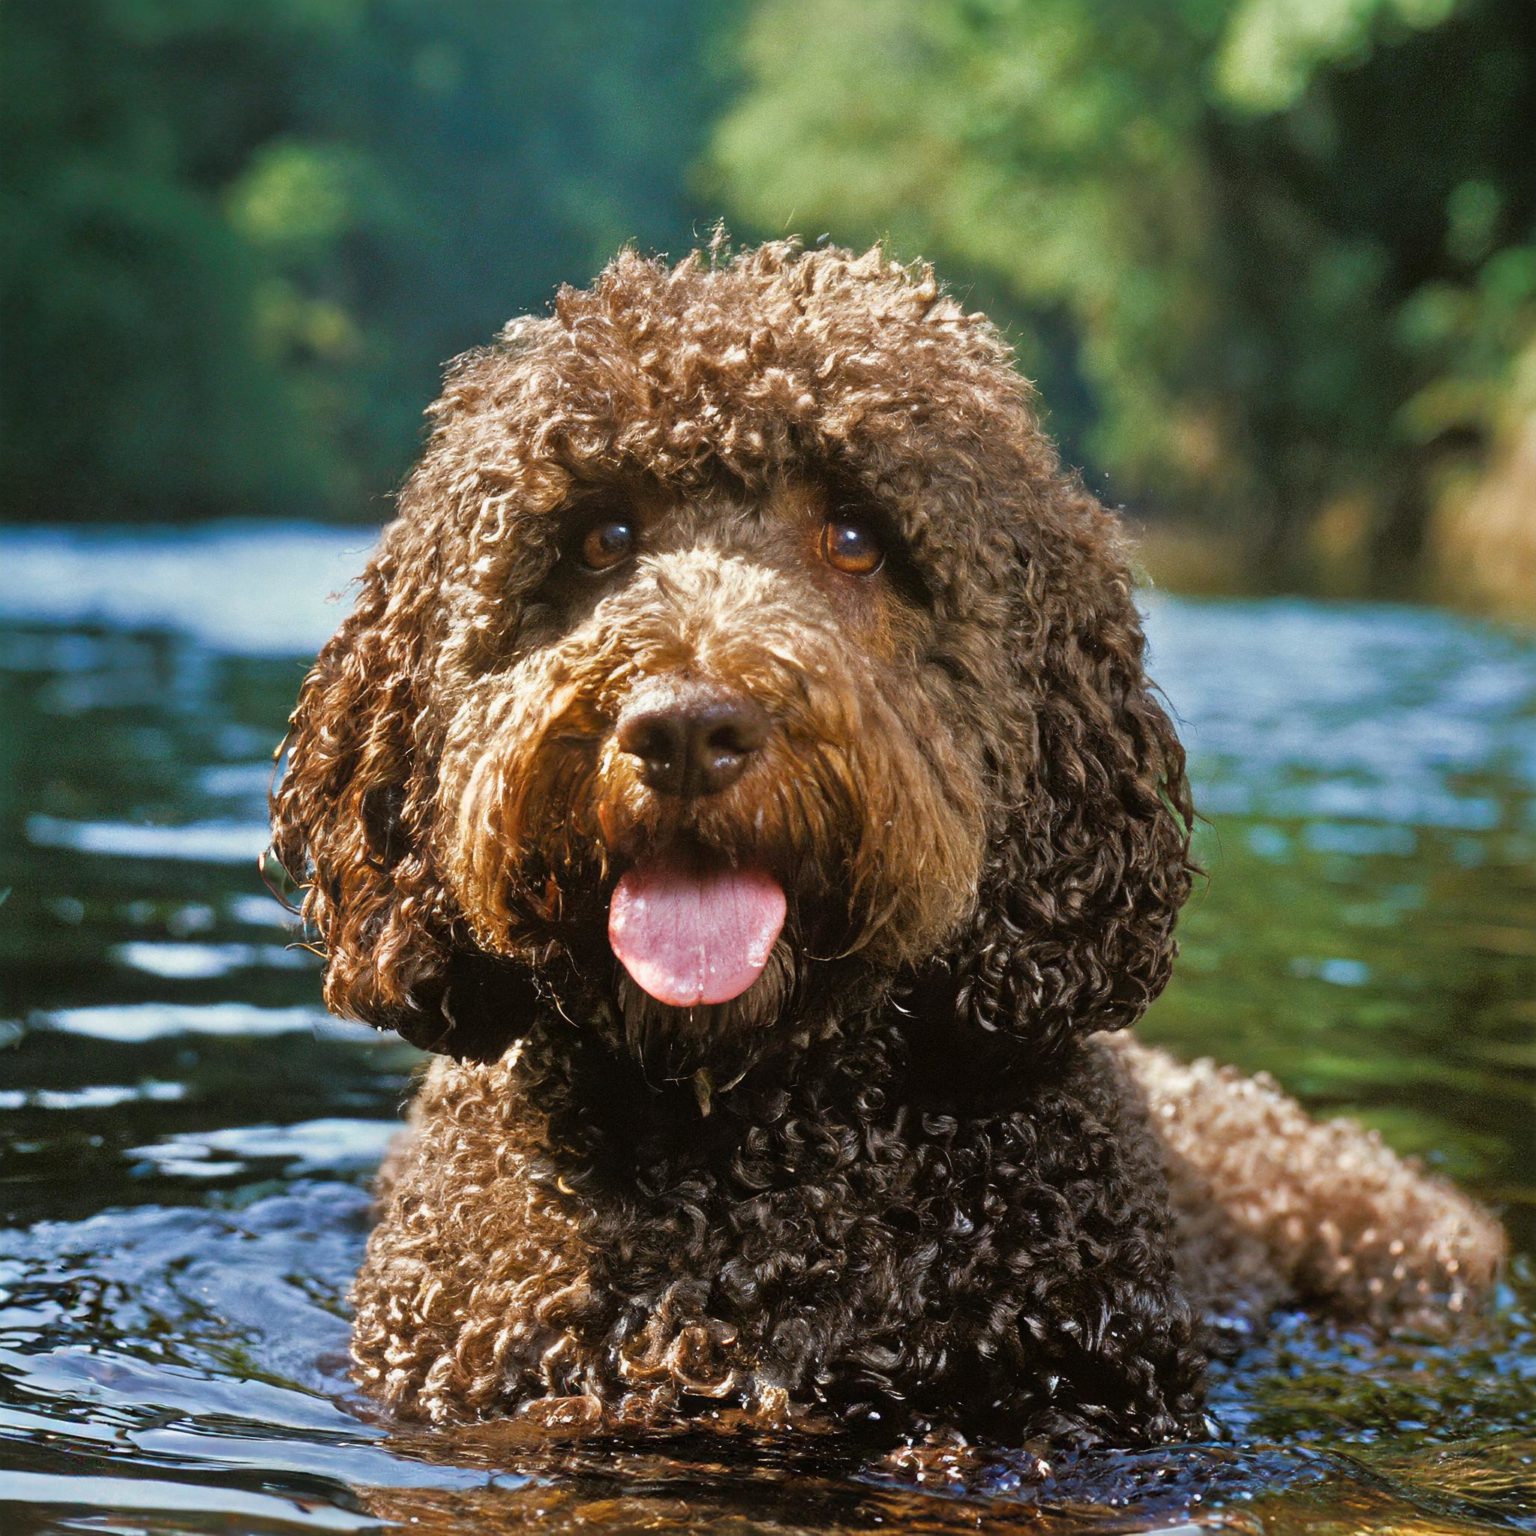 The Barbet was originally a water dog and was primarily used in France for hunting water game, as mentioned in 16th century scripts.